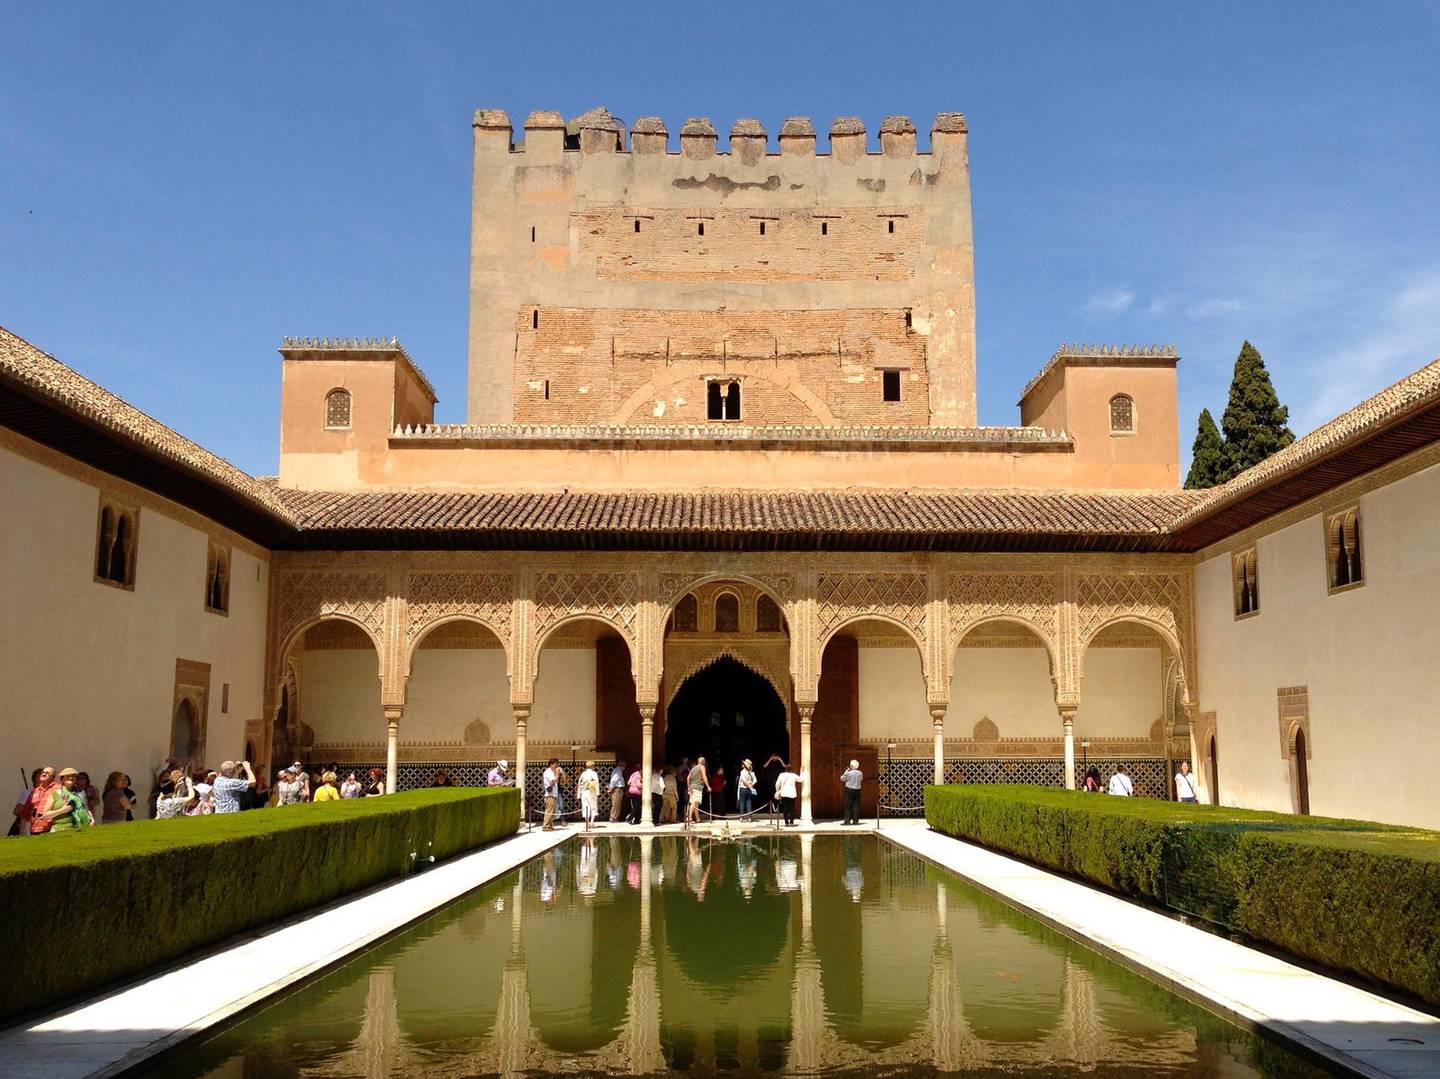 The Alhambra is busy with tourists between April and October.